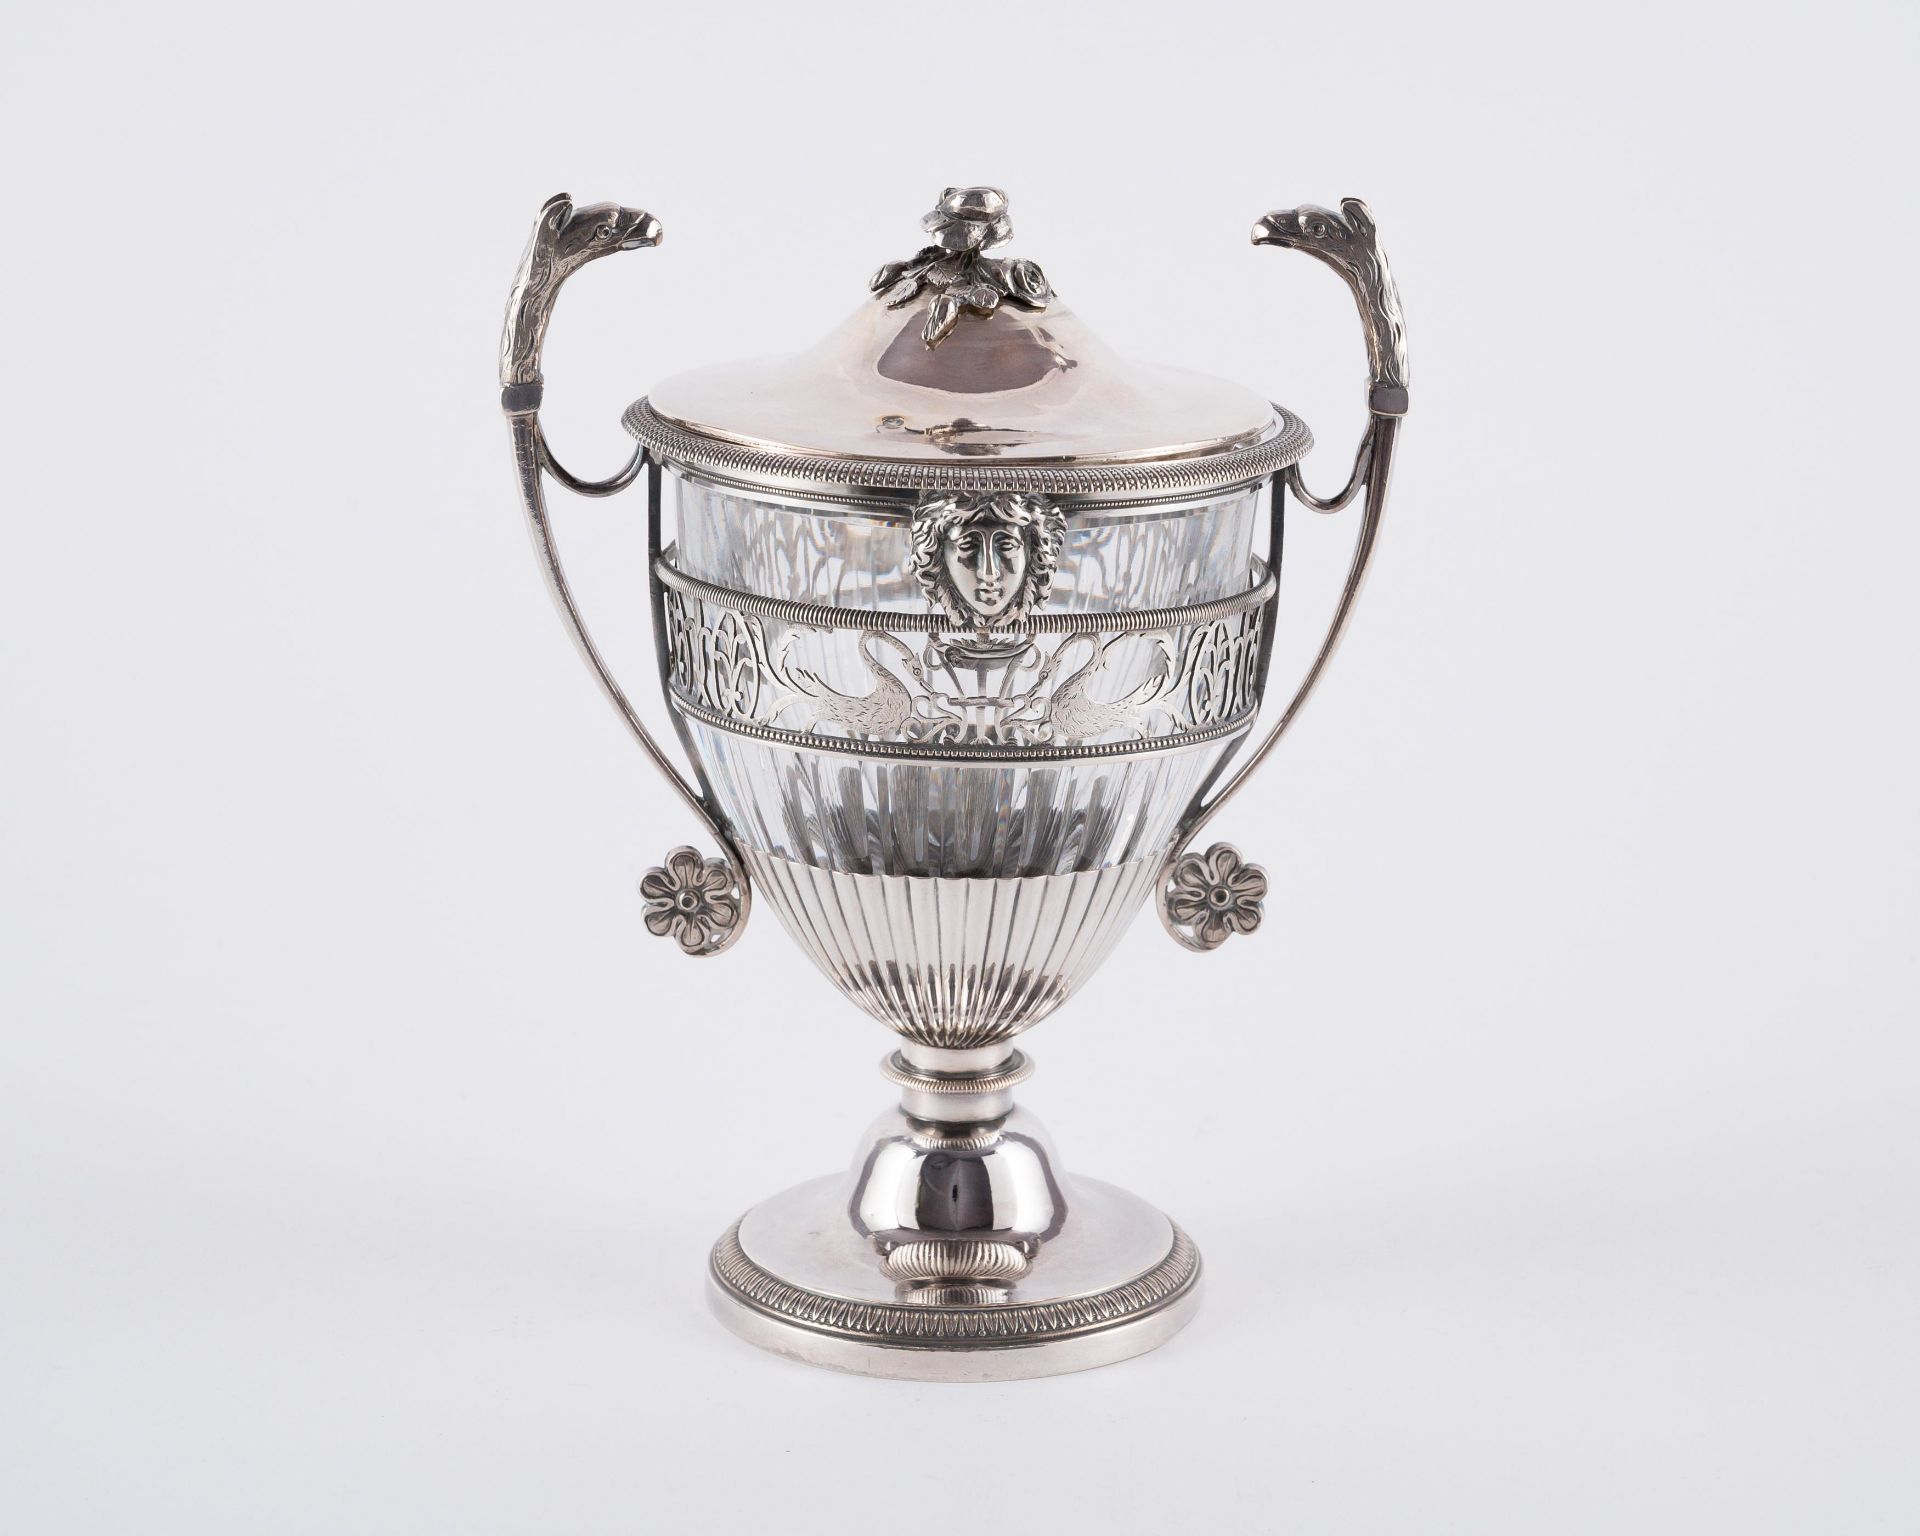 Nicolas-Richard Masson: FOOTED-SILVER SUGAR VESSEL WITH MASCARONS - Image 3 of 6